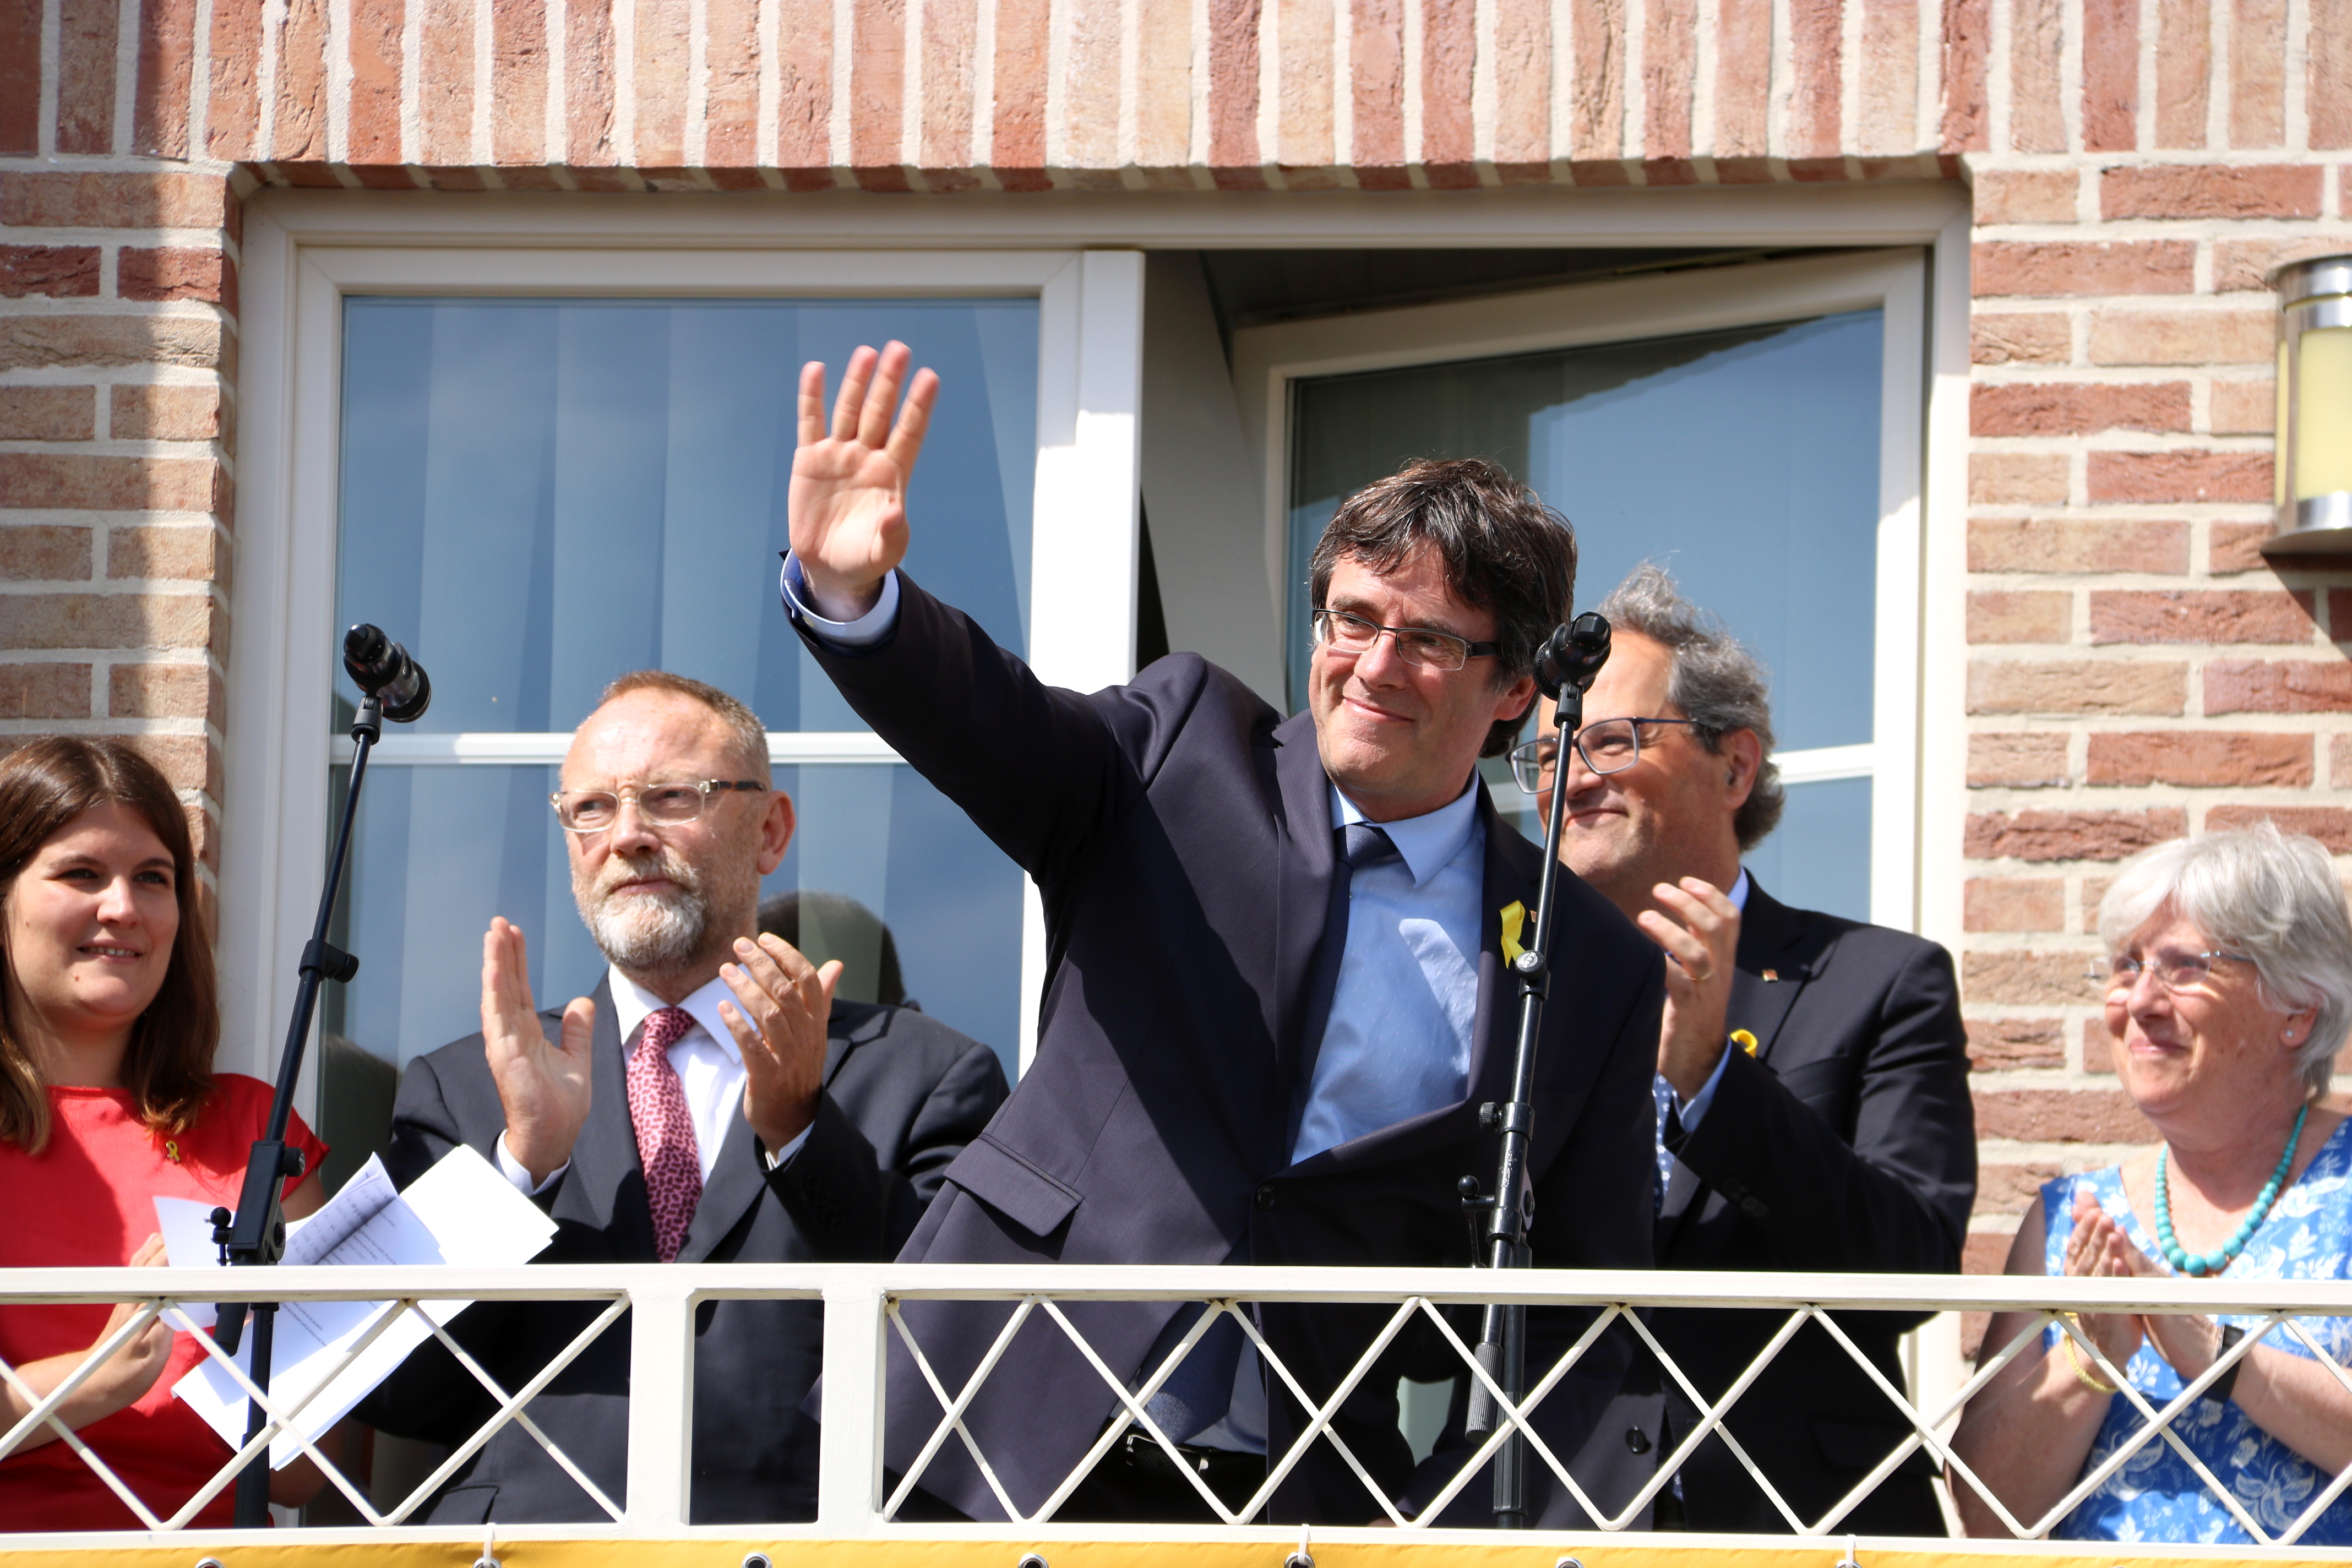 Carles Puigdemont arrives in Waterloo after Germany rejected extraditing him to Spain (by Laura Pous)